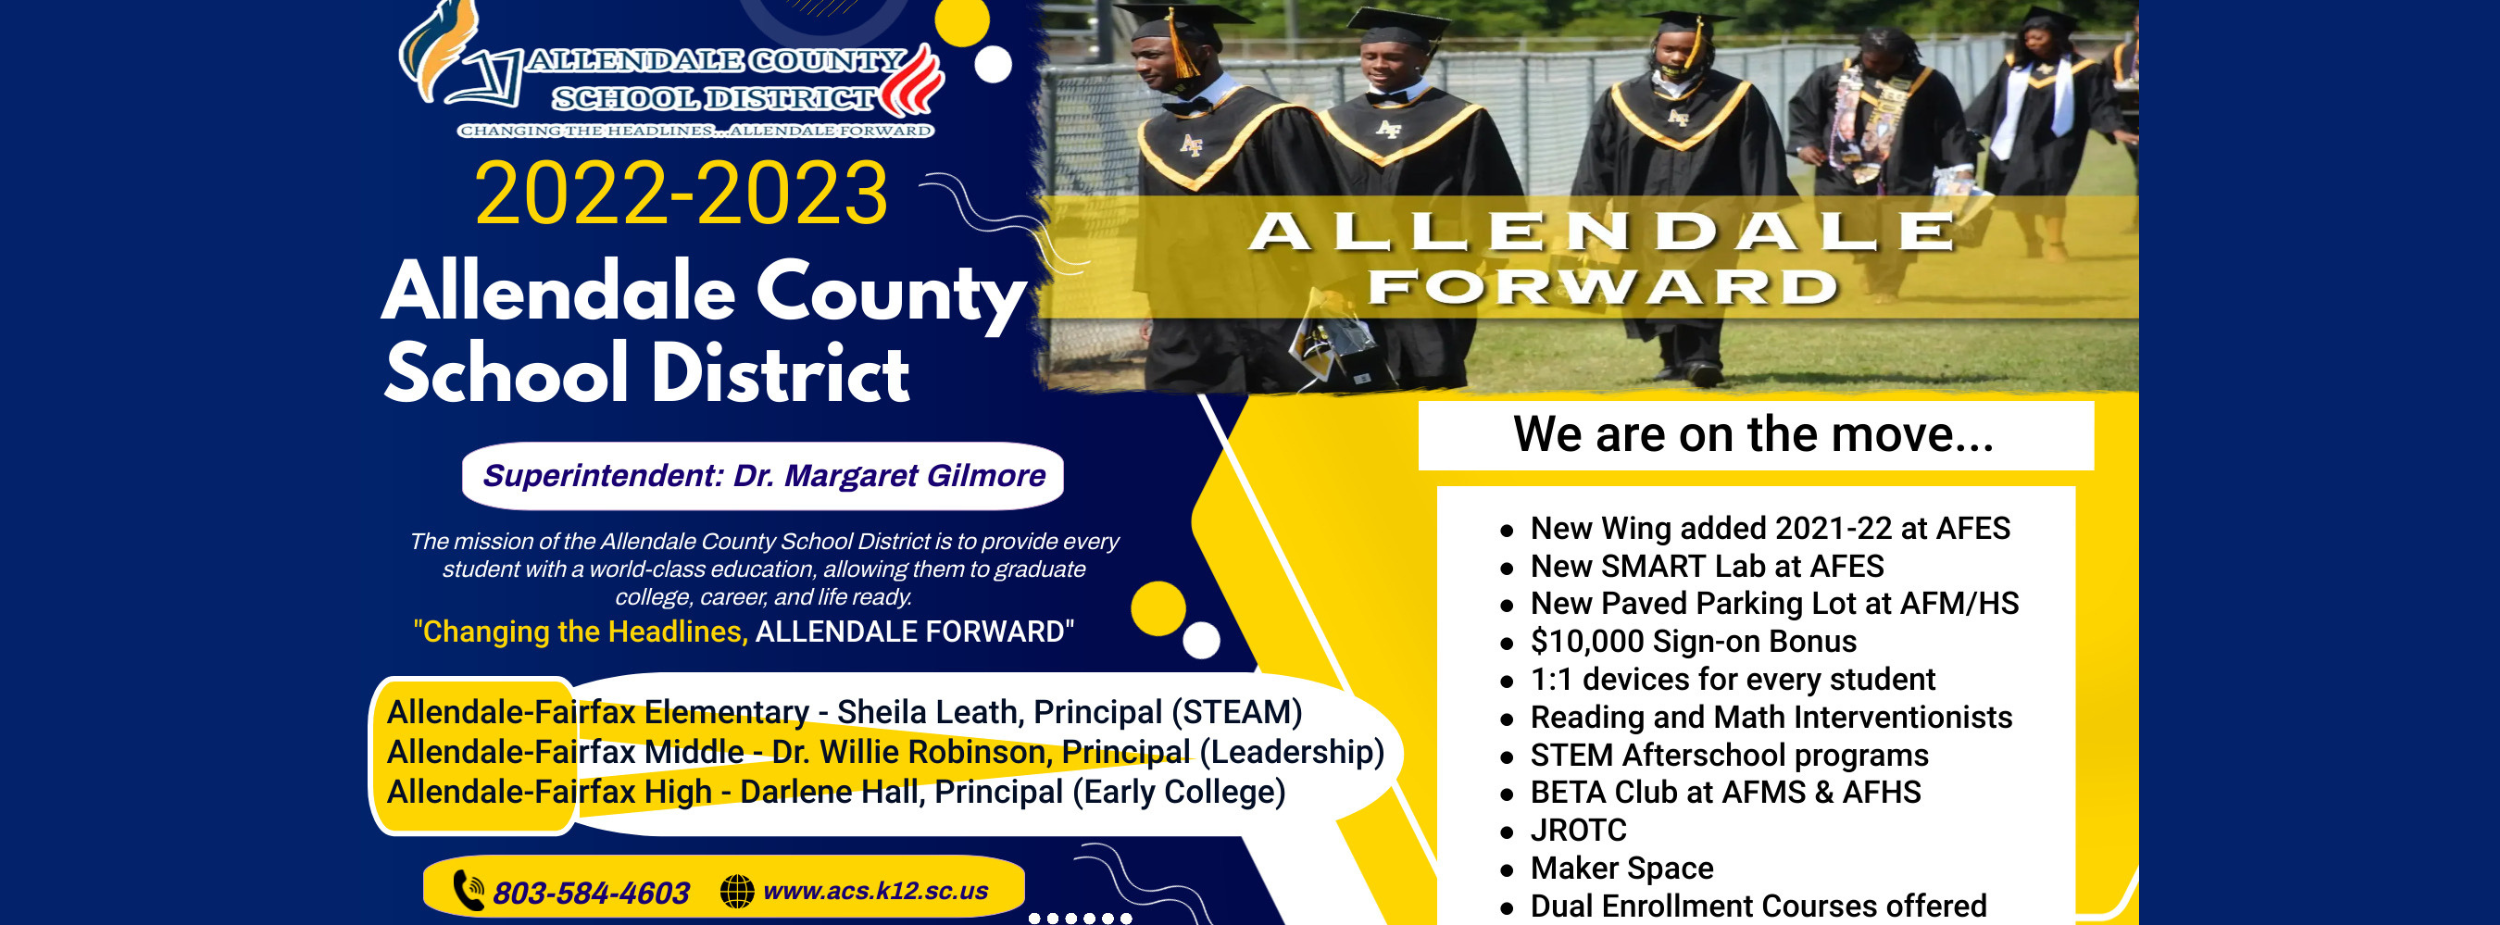 School district misssion, hcanging the headlines, allendale forward we are on the move new wing added new smart lab at afes new paved parking lot 10000 dollar sign-on bonus 1:1 devices for every student 